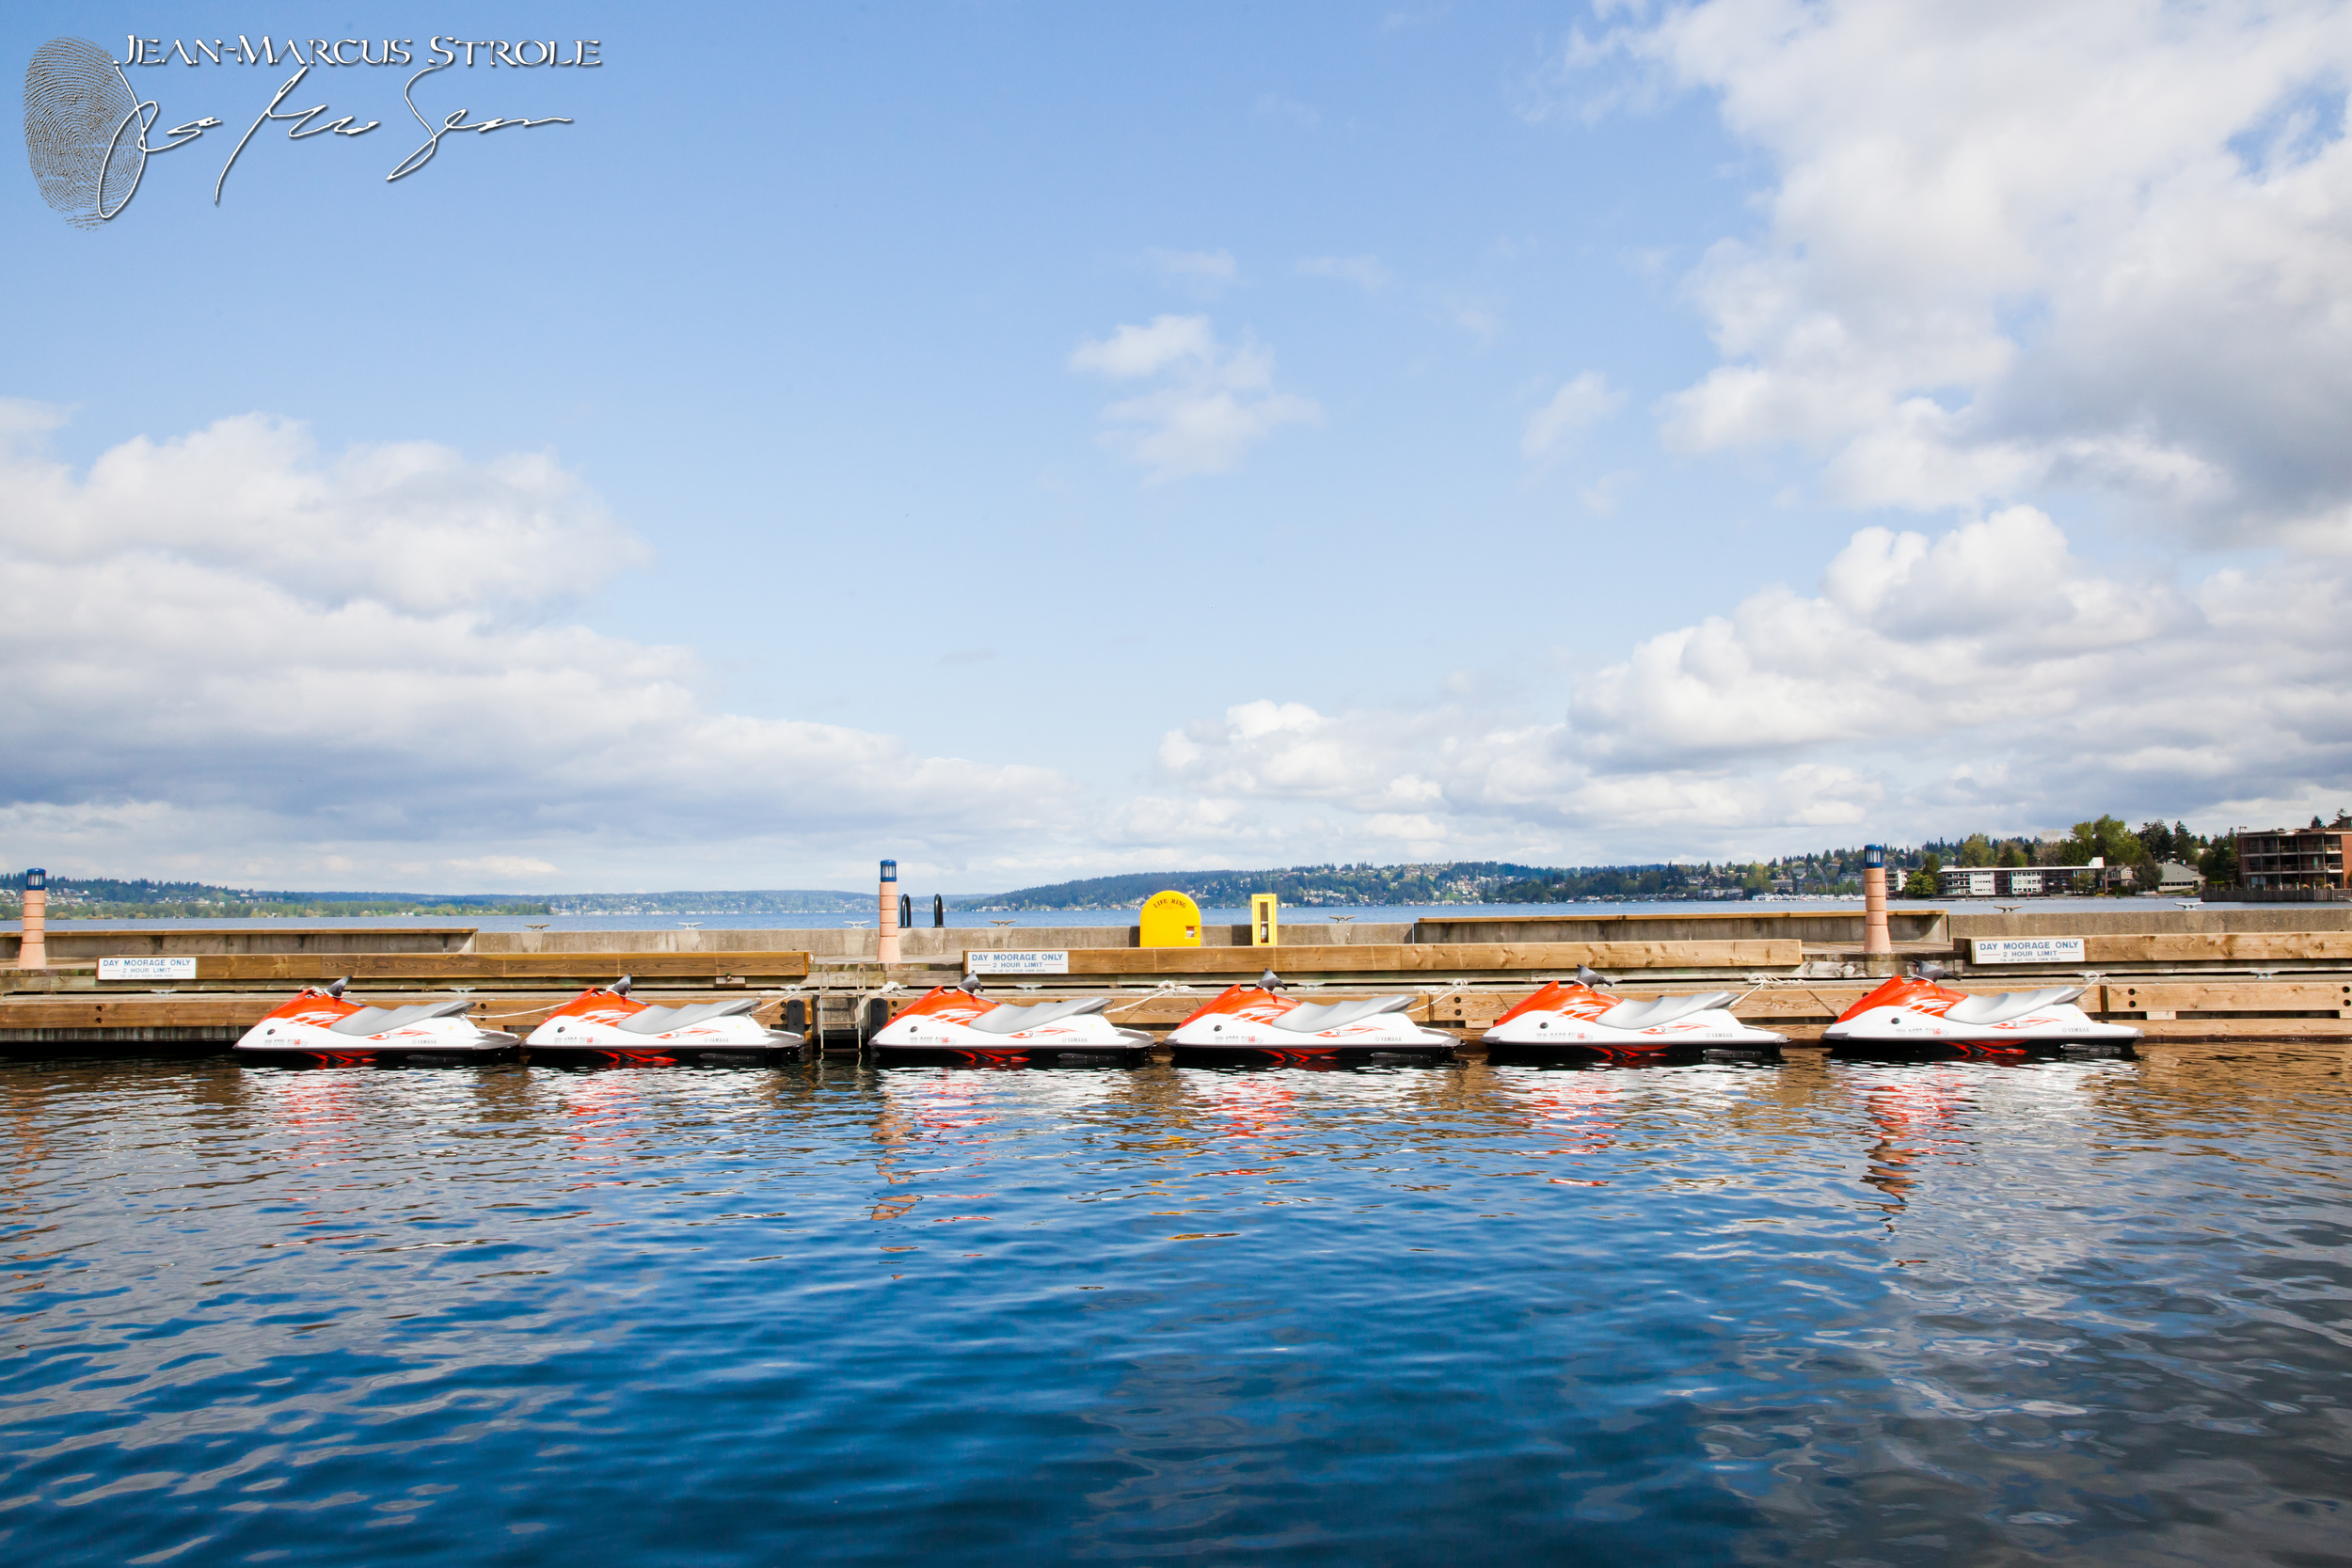 Carillon_Point_Waterfront_Adventures-Jean-Marcus_Strole_Photography-18.jpg